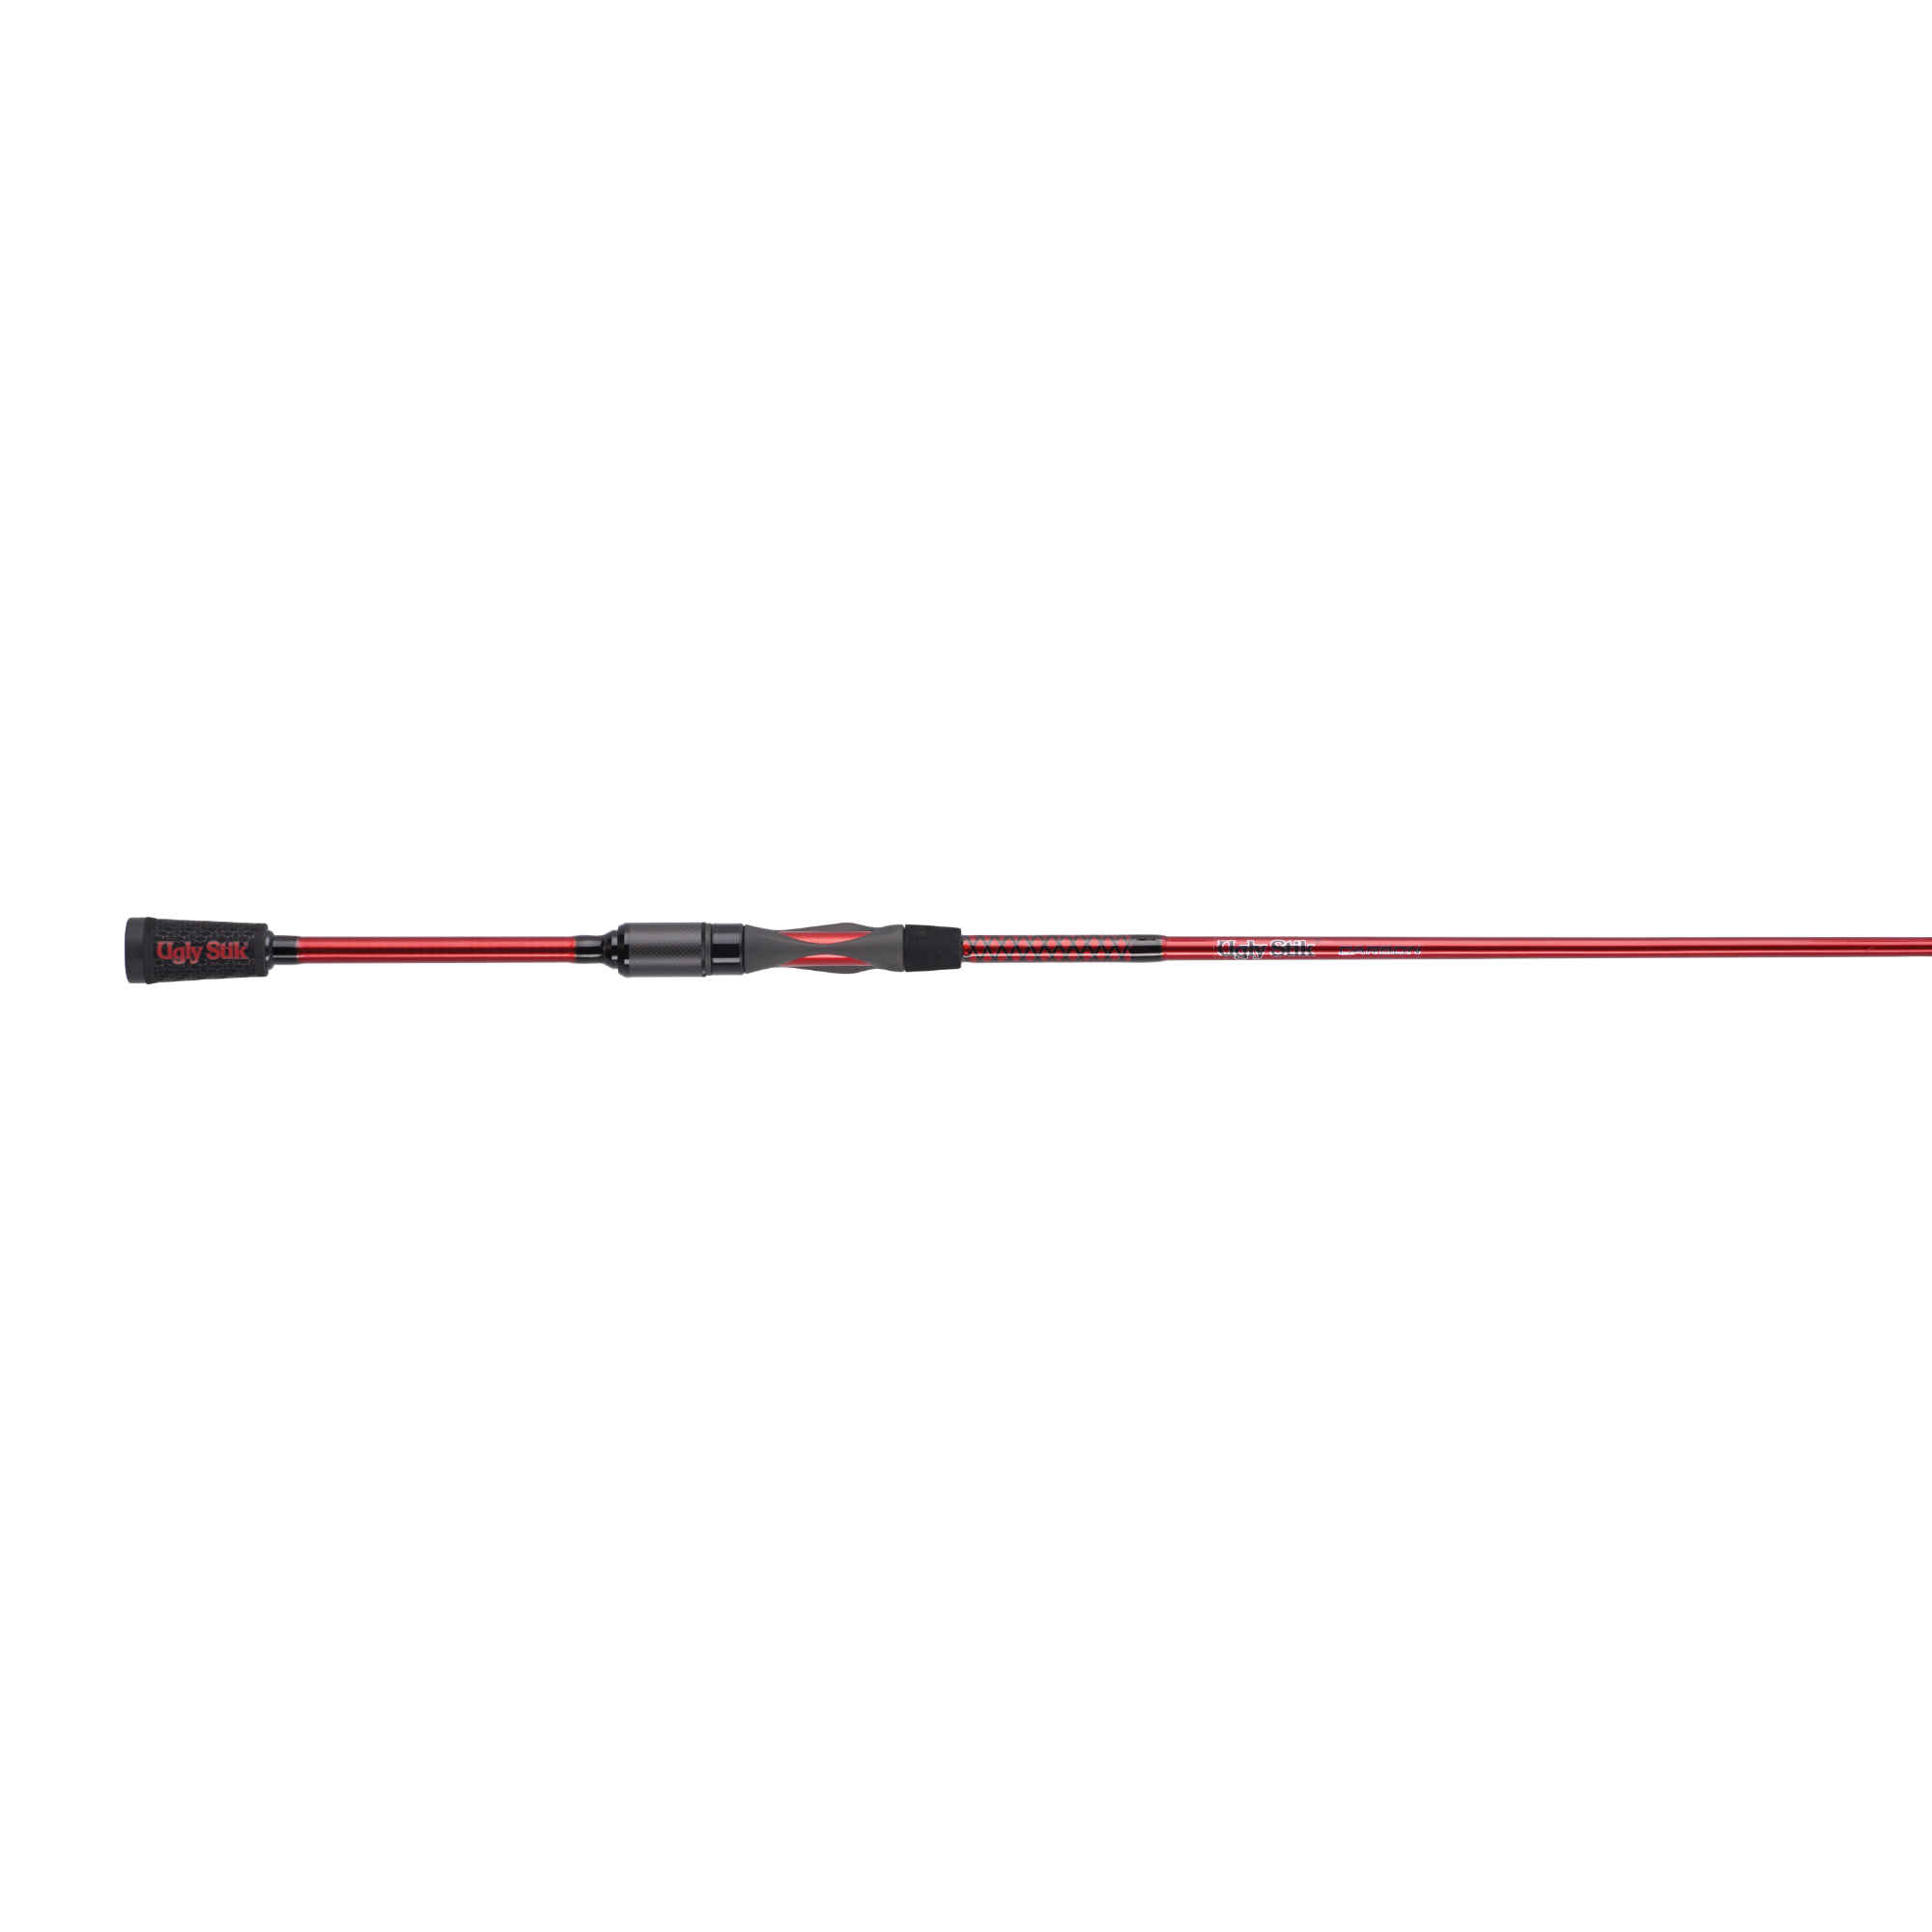 Ugly Stik Carbon Spinning Rod, 2 Piece, Ultra-Light, Moderate, 8 Guides, 1 /32-1/8oz Lures USCBSP702UL with Free S&H — CampSaver